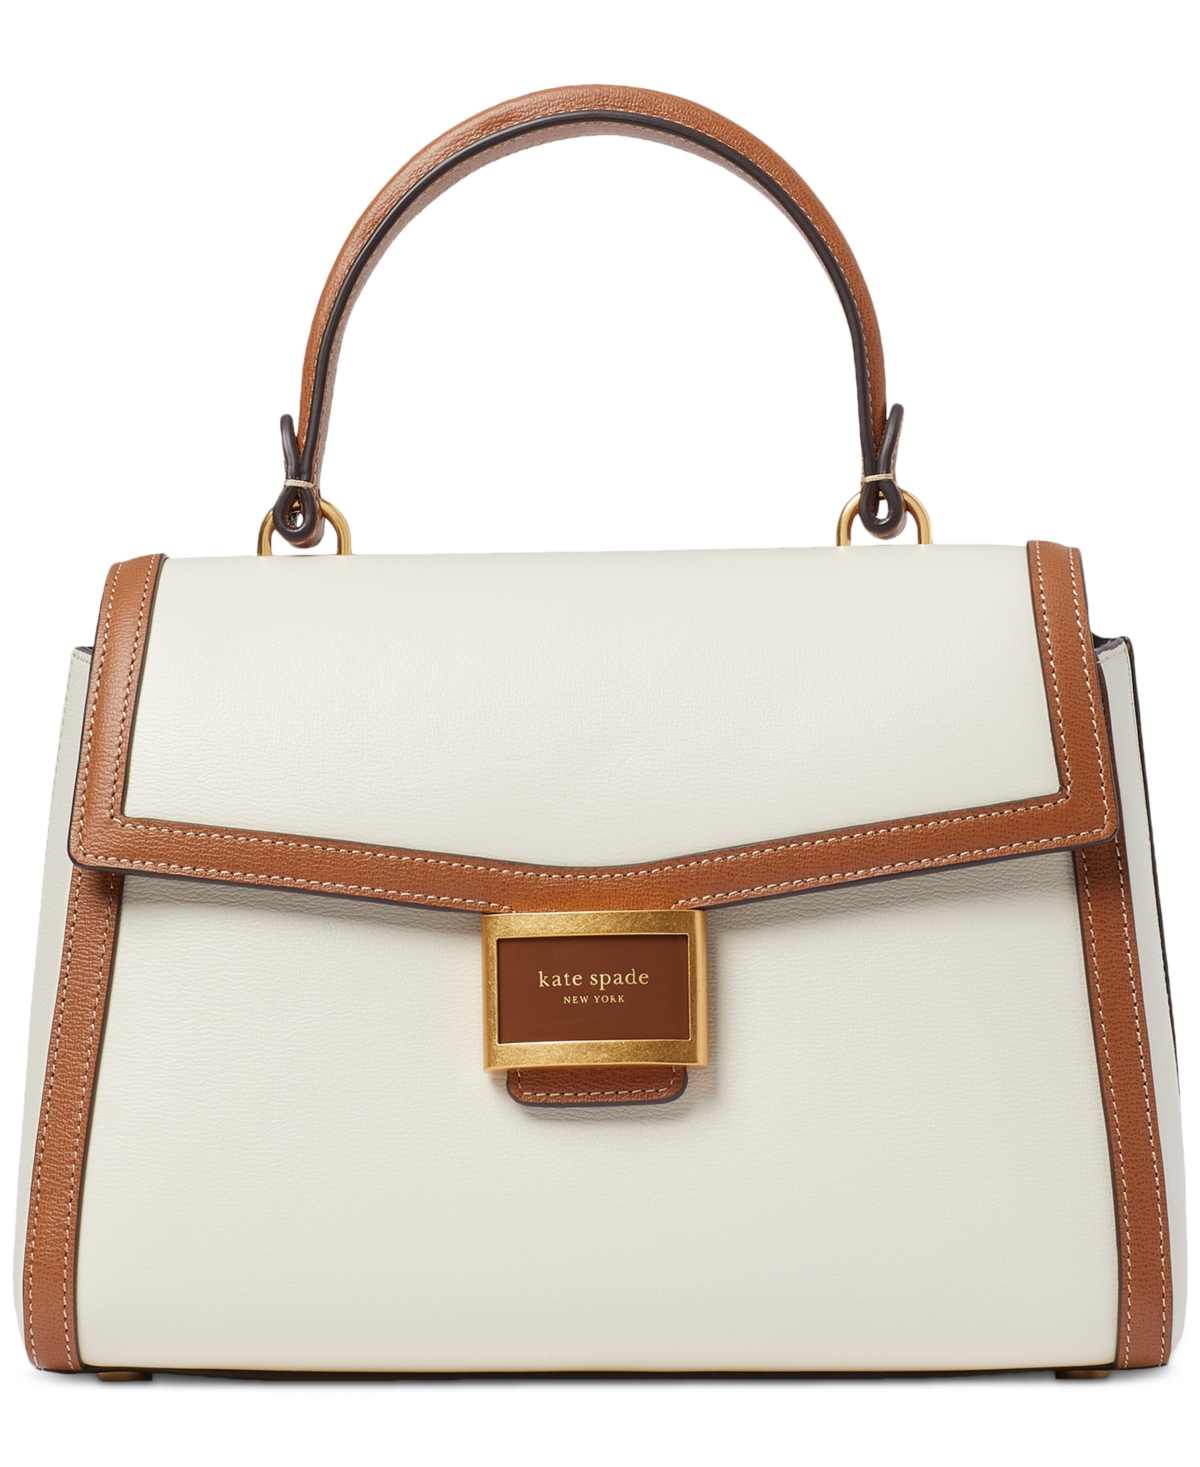 Katy Colorblocked Small Textured Leather Satchel - Halo White Multi